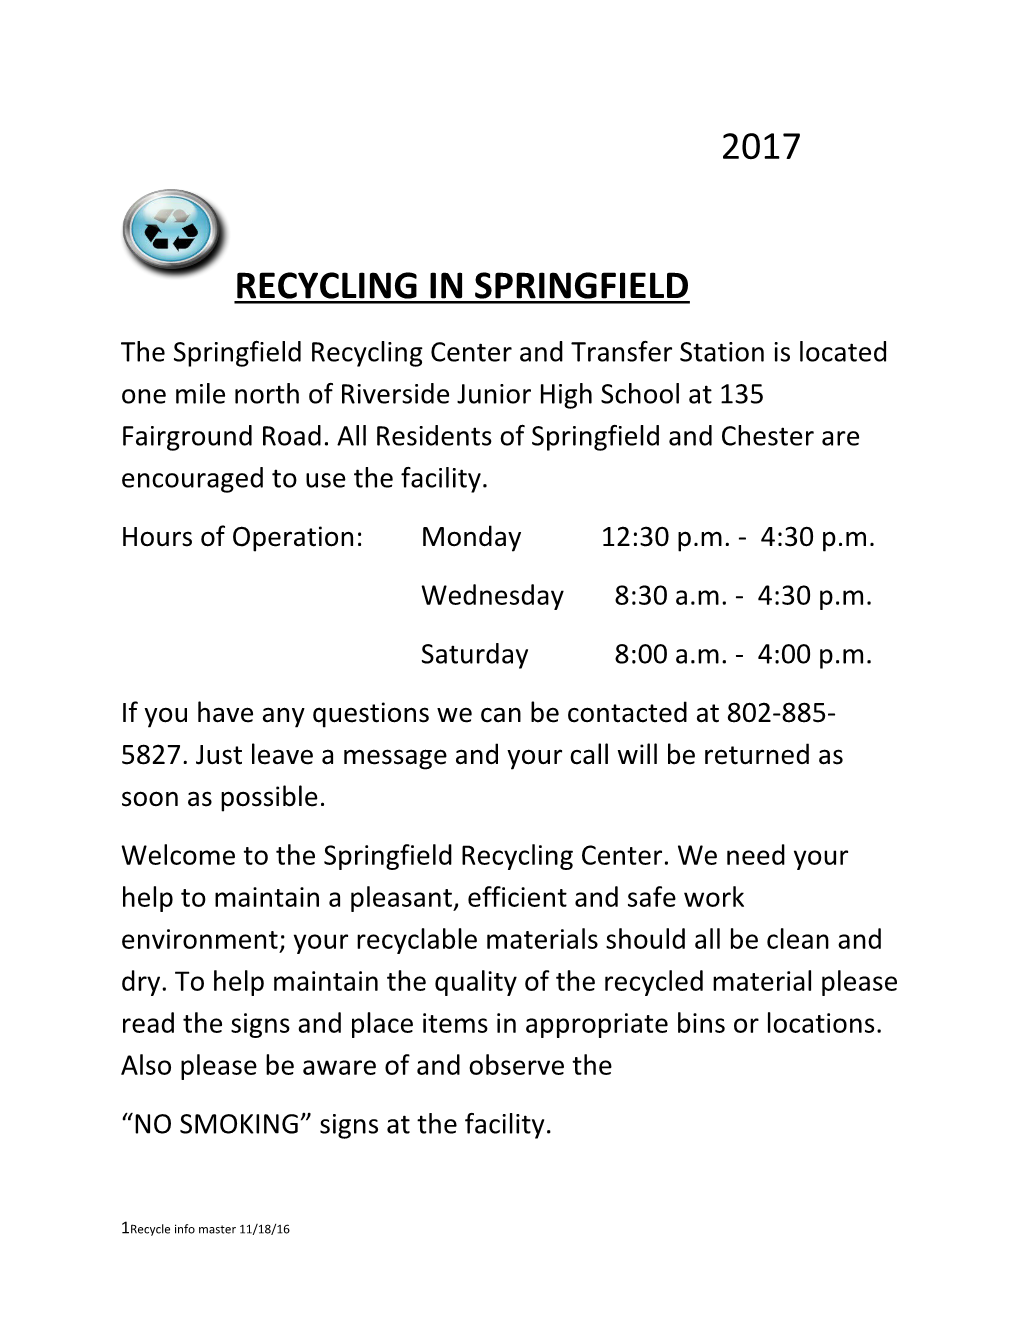 2017 Recycling in Springfield